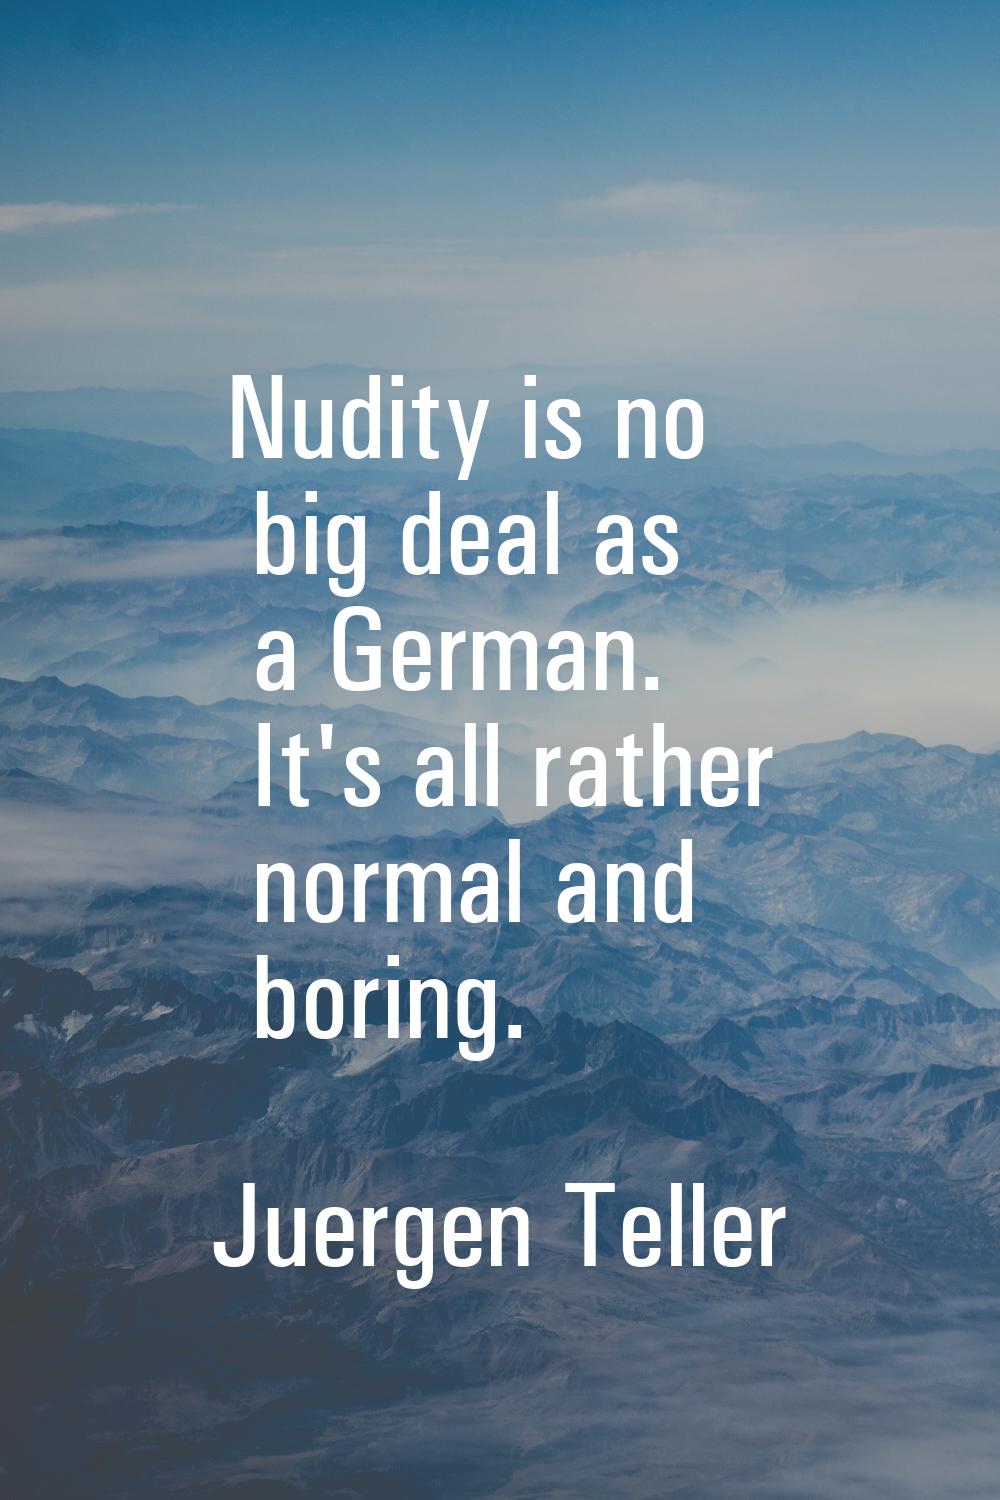 Nudity is no big deal as a German. It's all rather normal and boring.